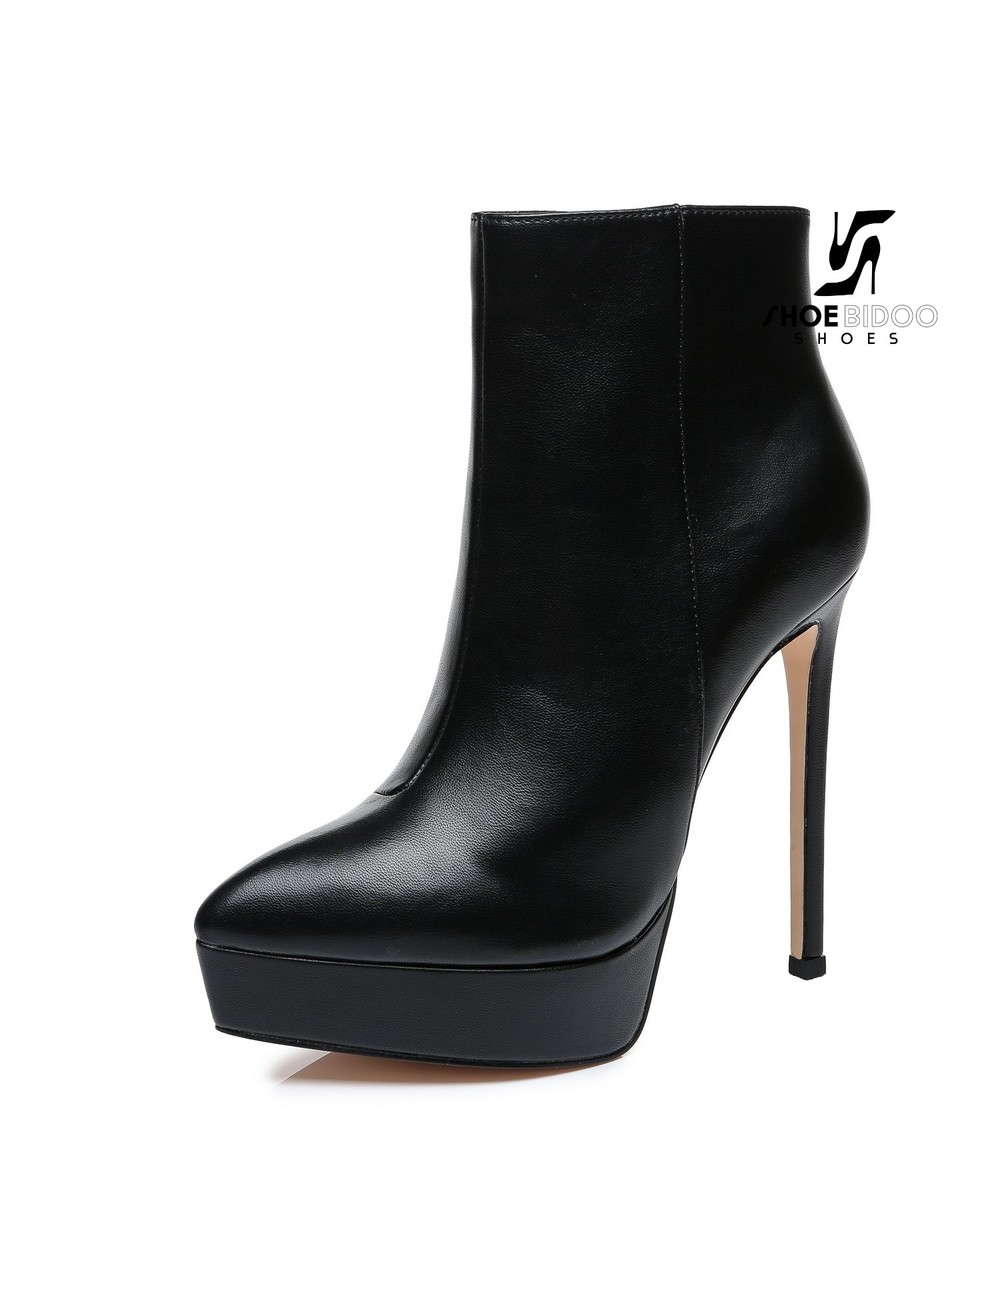 Giaro Giaro Platform ankle boots STACK in black with 14cm heels ...